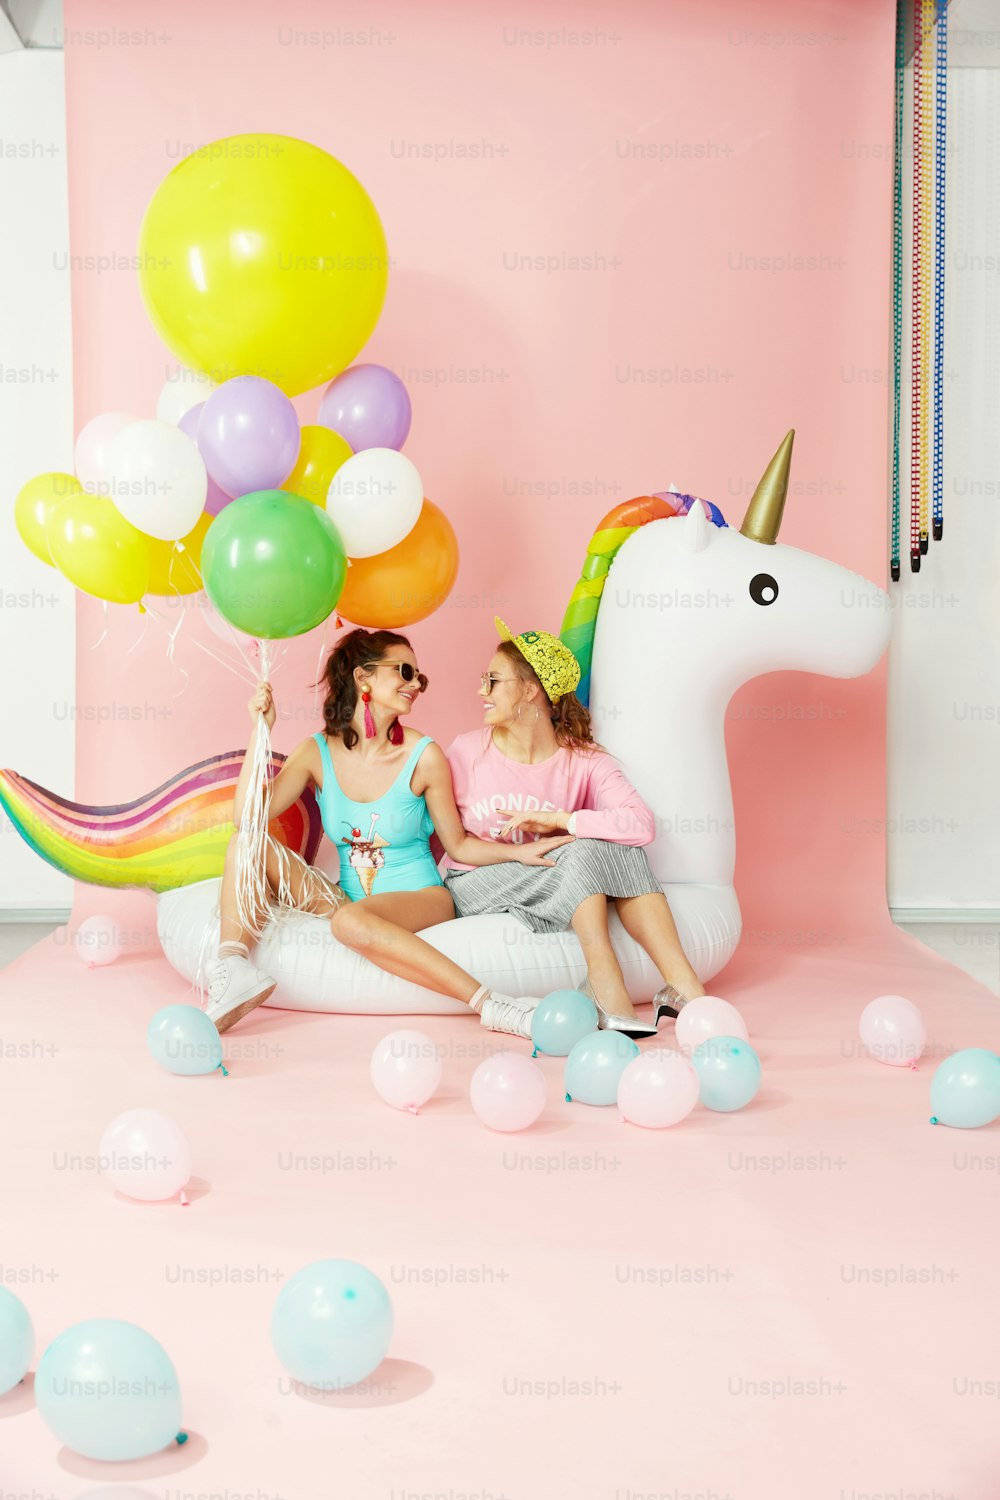 Fashion Women. Happy Friends In Summer Clothes. Beautiful Smiling Girls In Stylish  Wear Having Fun And Laughing, Holding Big Inflatable Ice Cream On Colorful  Background Indoors. High Quality Image. Stock Photo, Picture